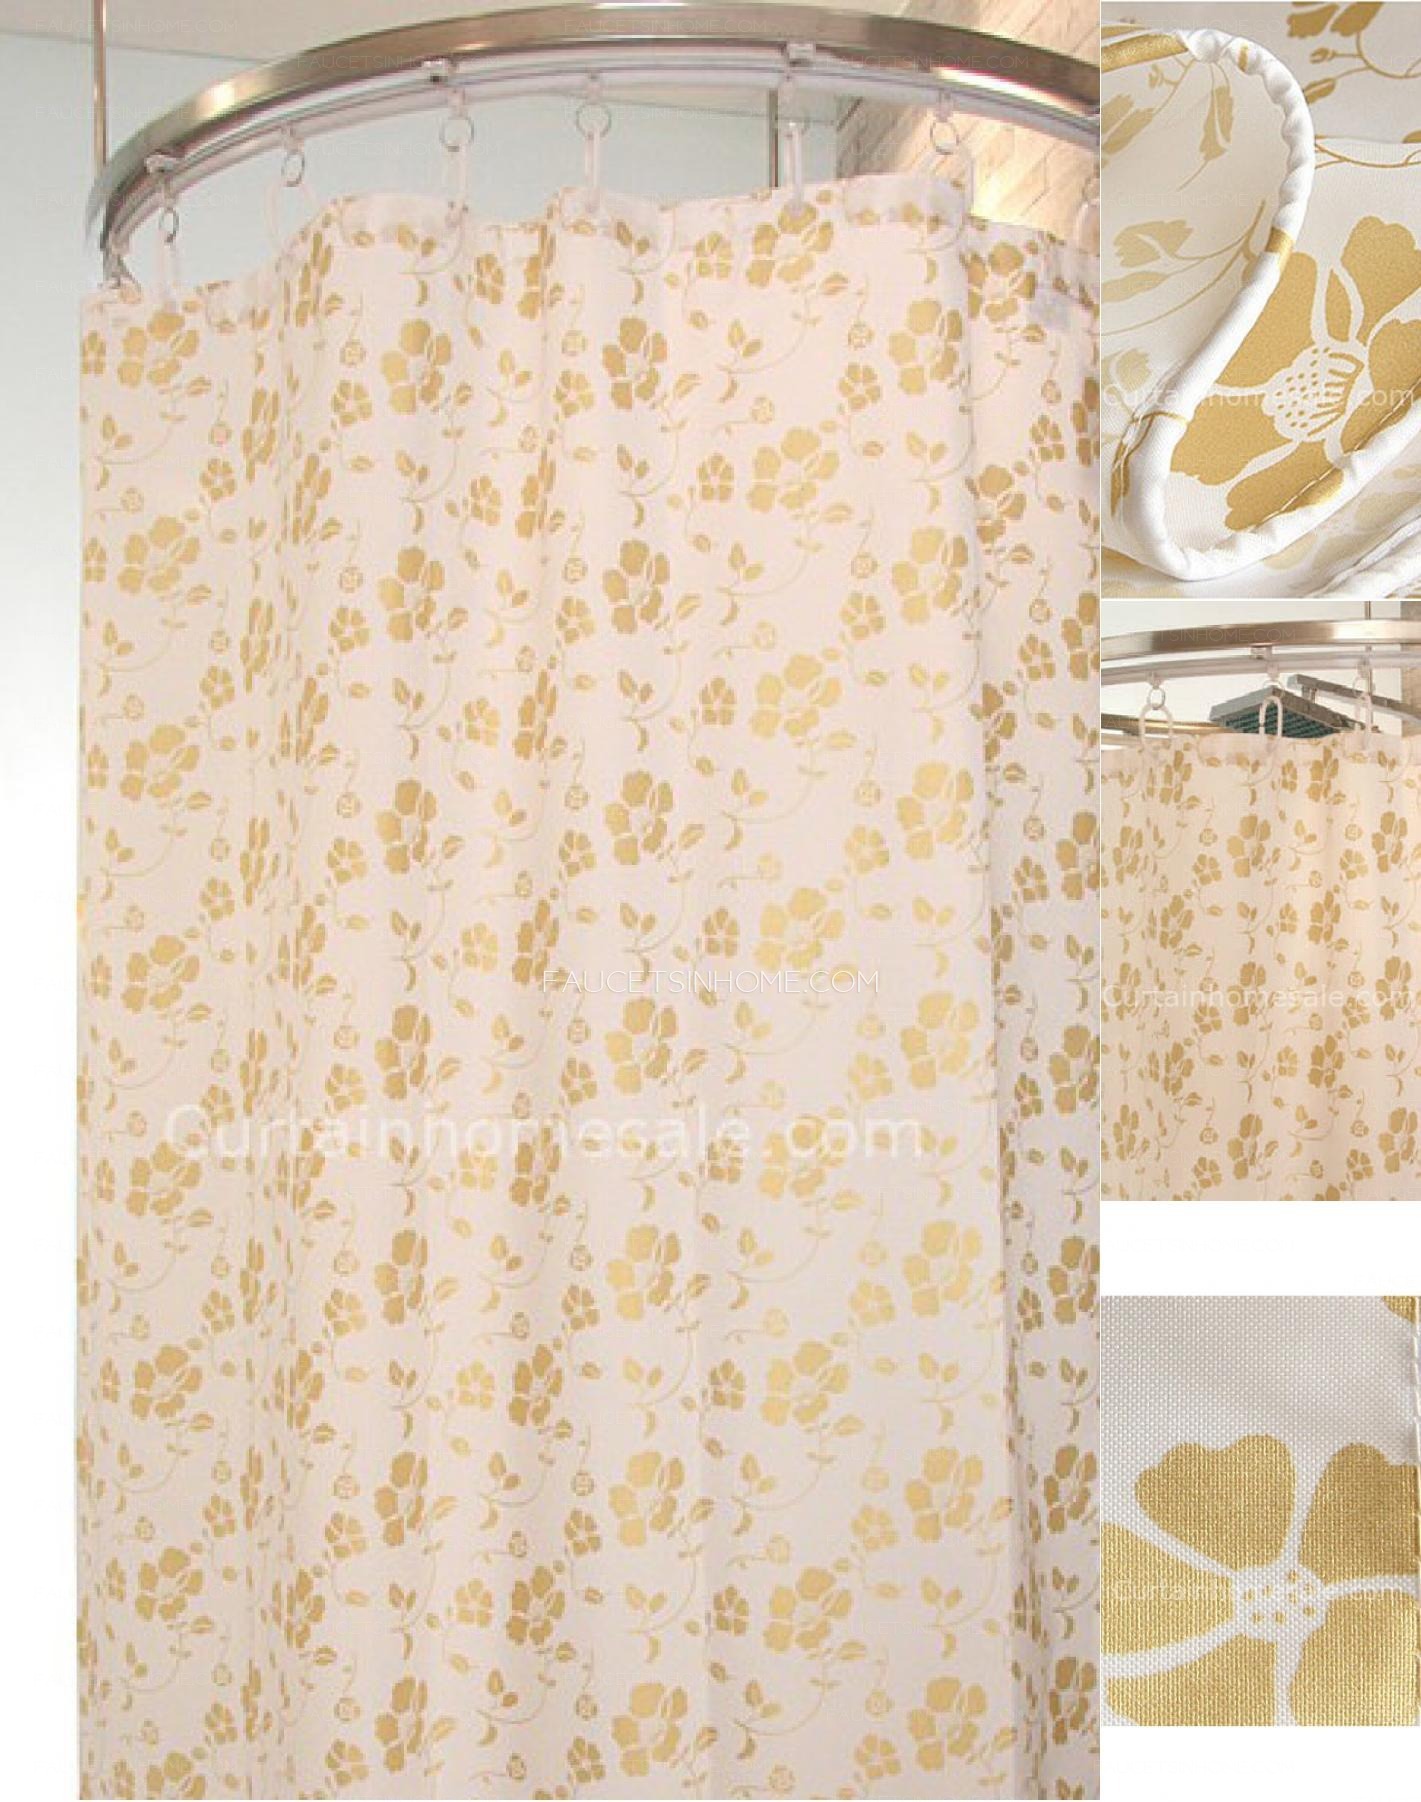 Luxury Floral Purple Color Cheap Shower Curtain And Toile